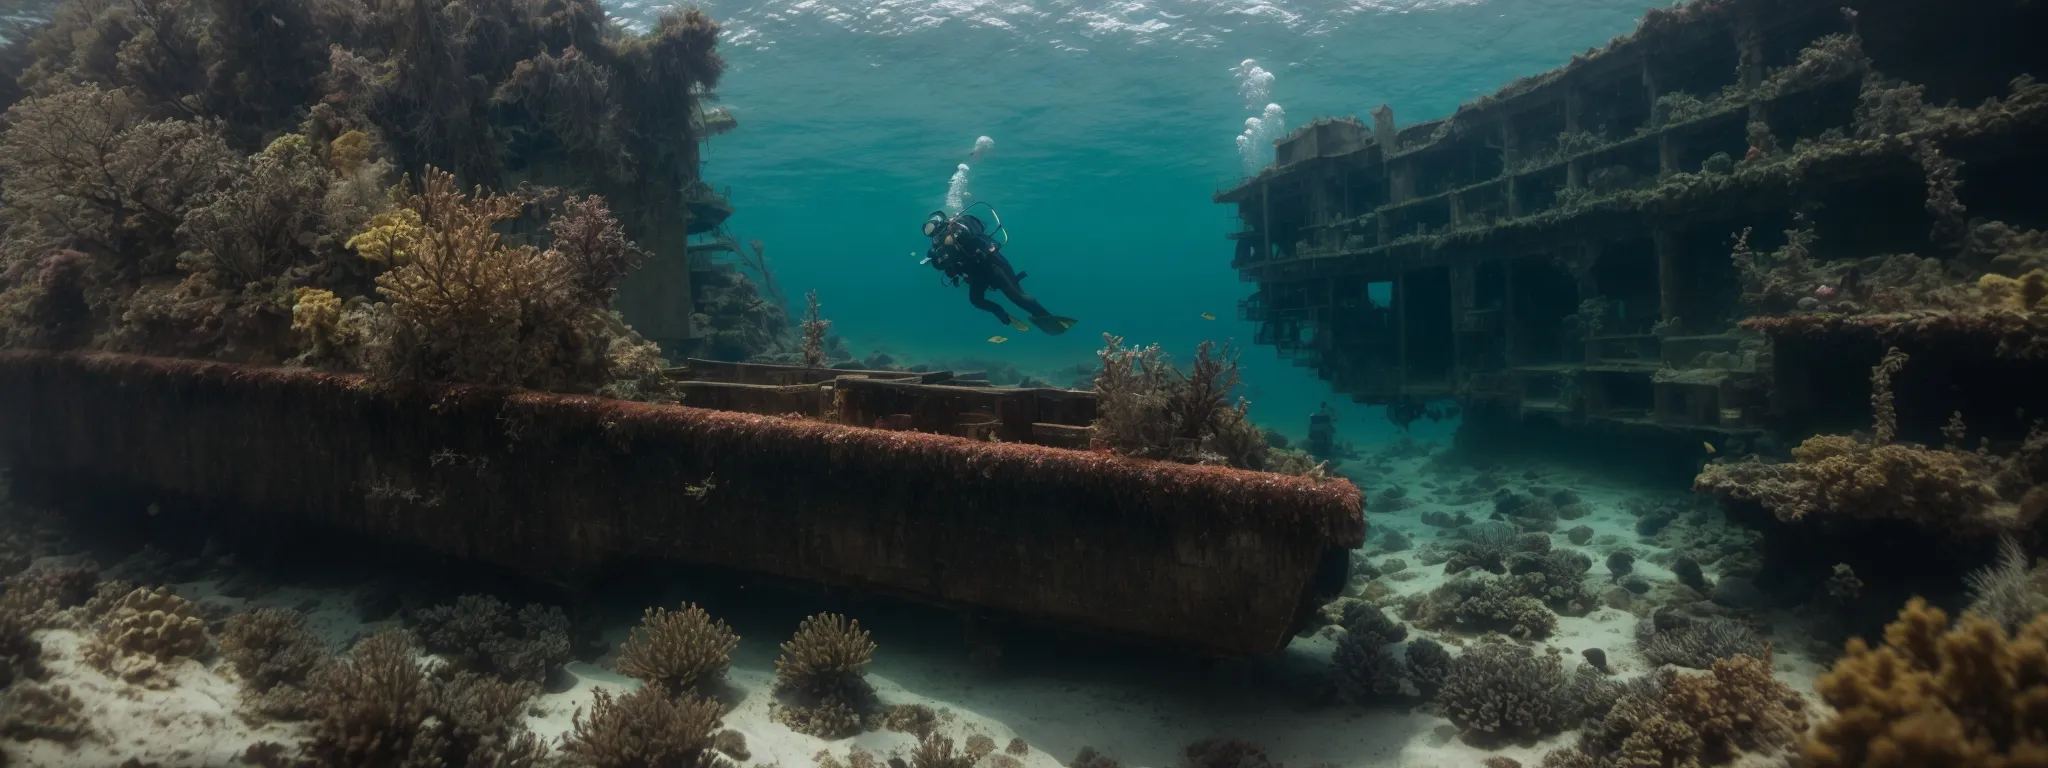 a diver swims through clear ocean waters, approaching a sunken, treasure-laden shipwreck.